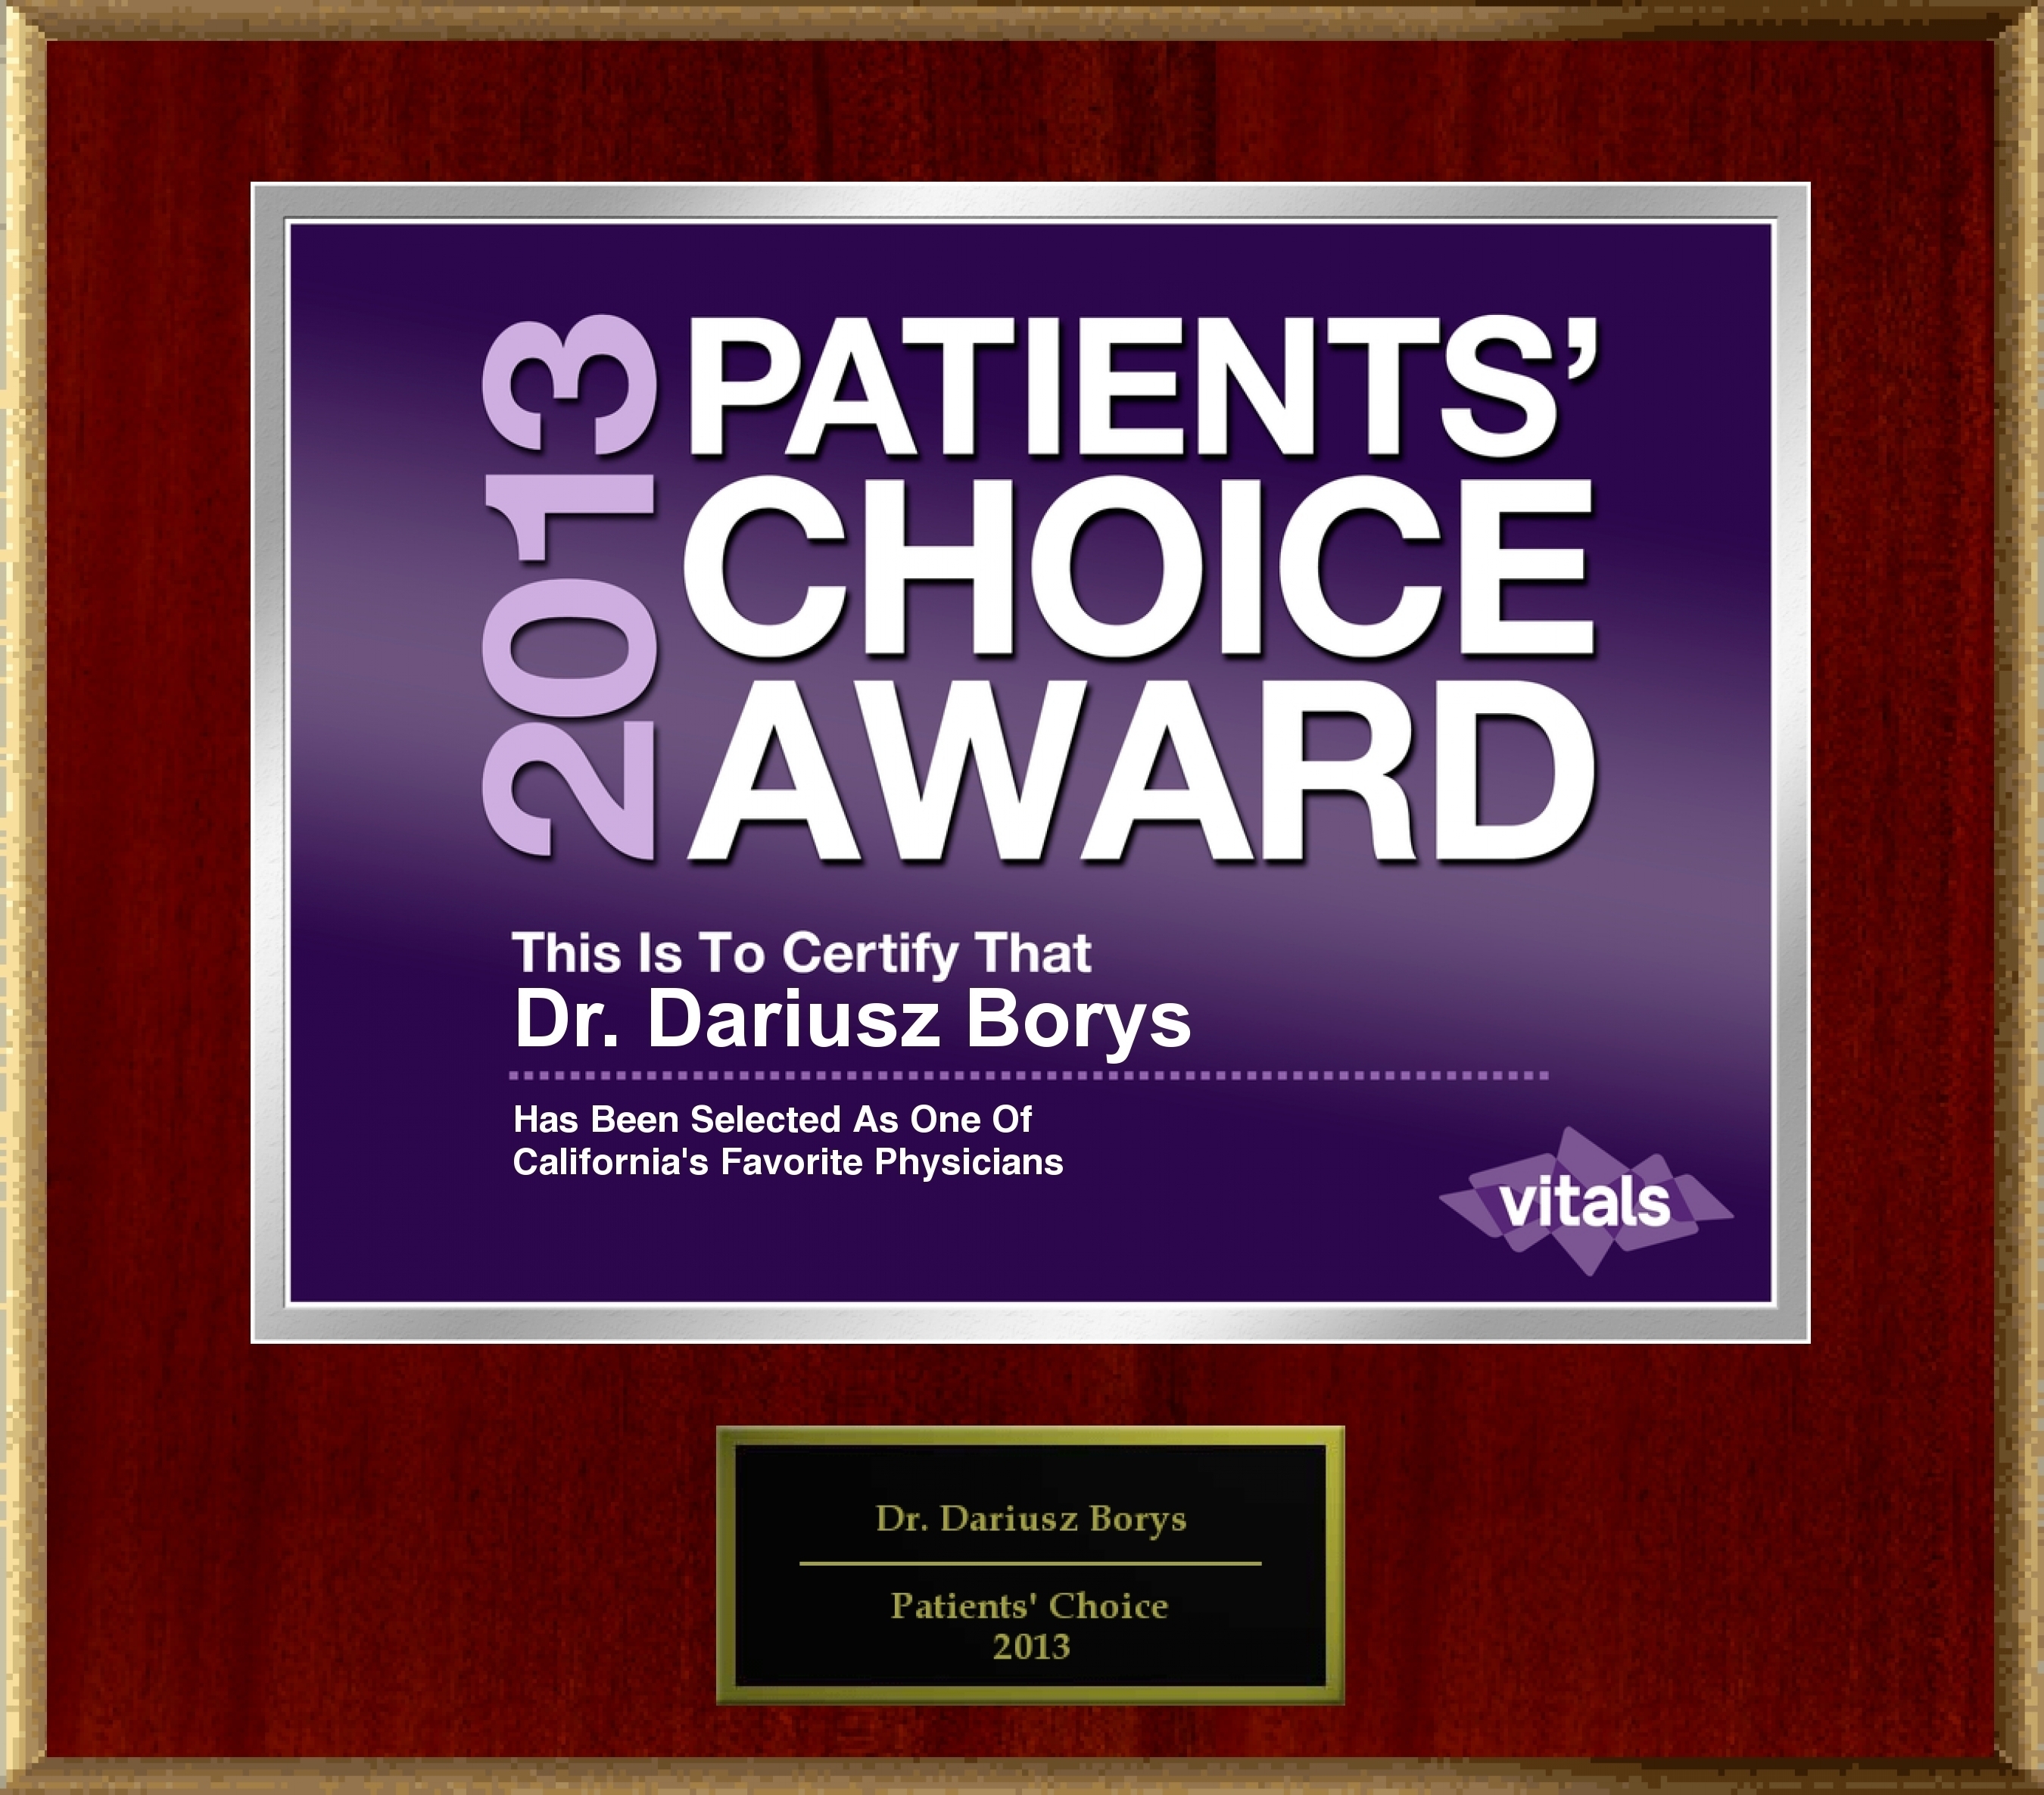 Dr. Dariusz Borys of Chicago, IL Named a Patients' Choice Award Winner for 2013. (PRNewsFoto/American Registry) (PRNewsFoto/AMERICAN REGISTRY)